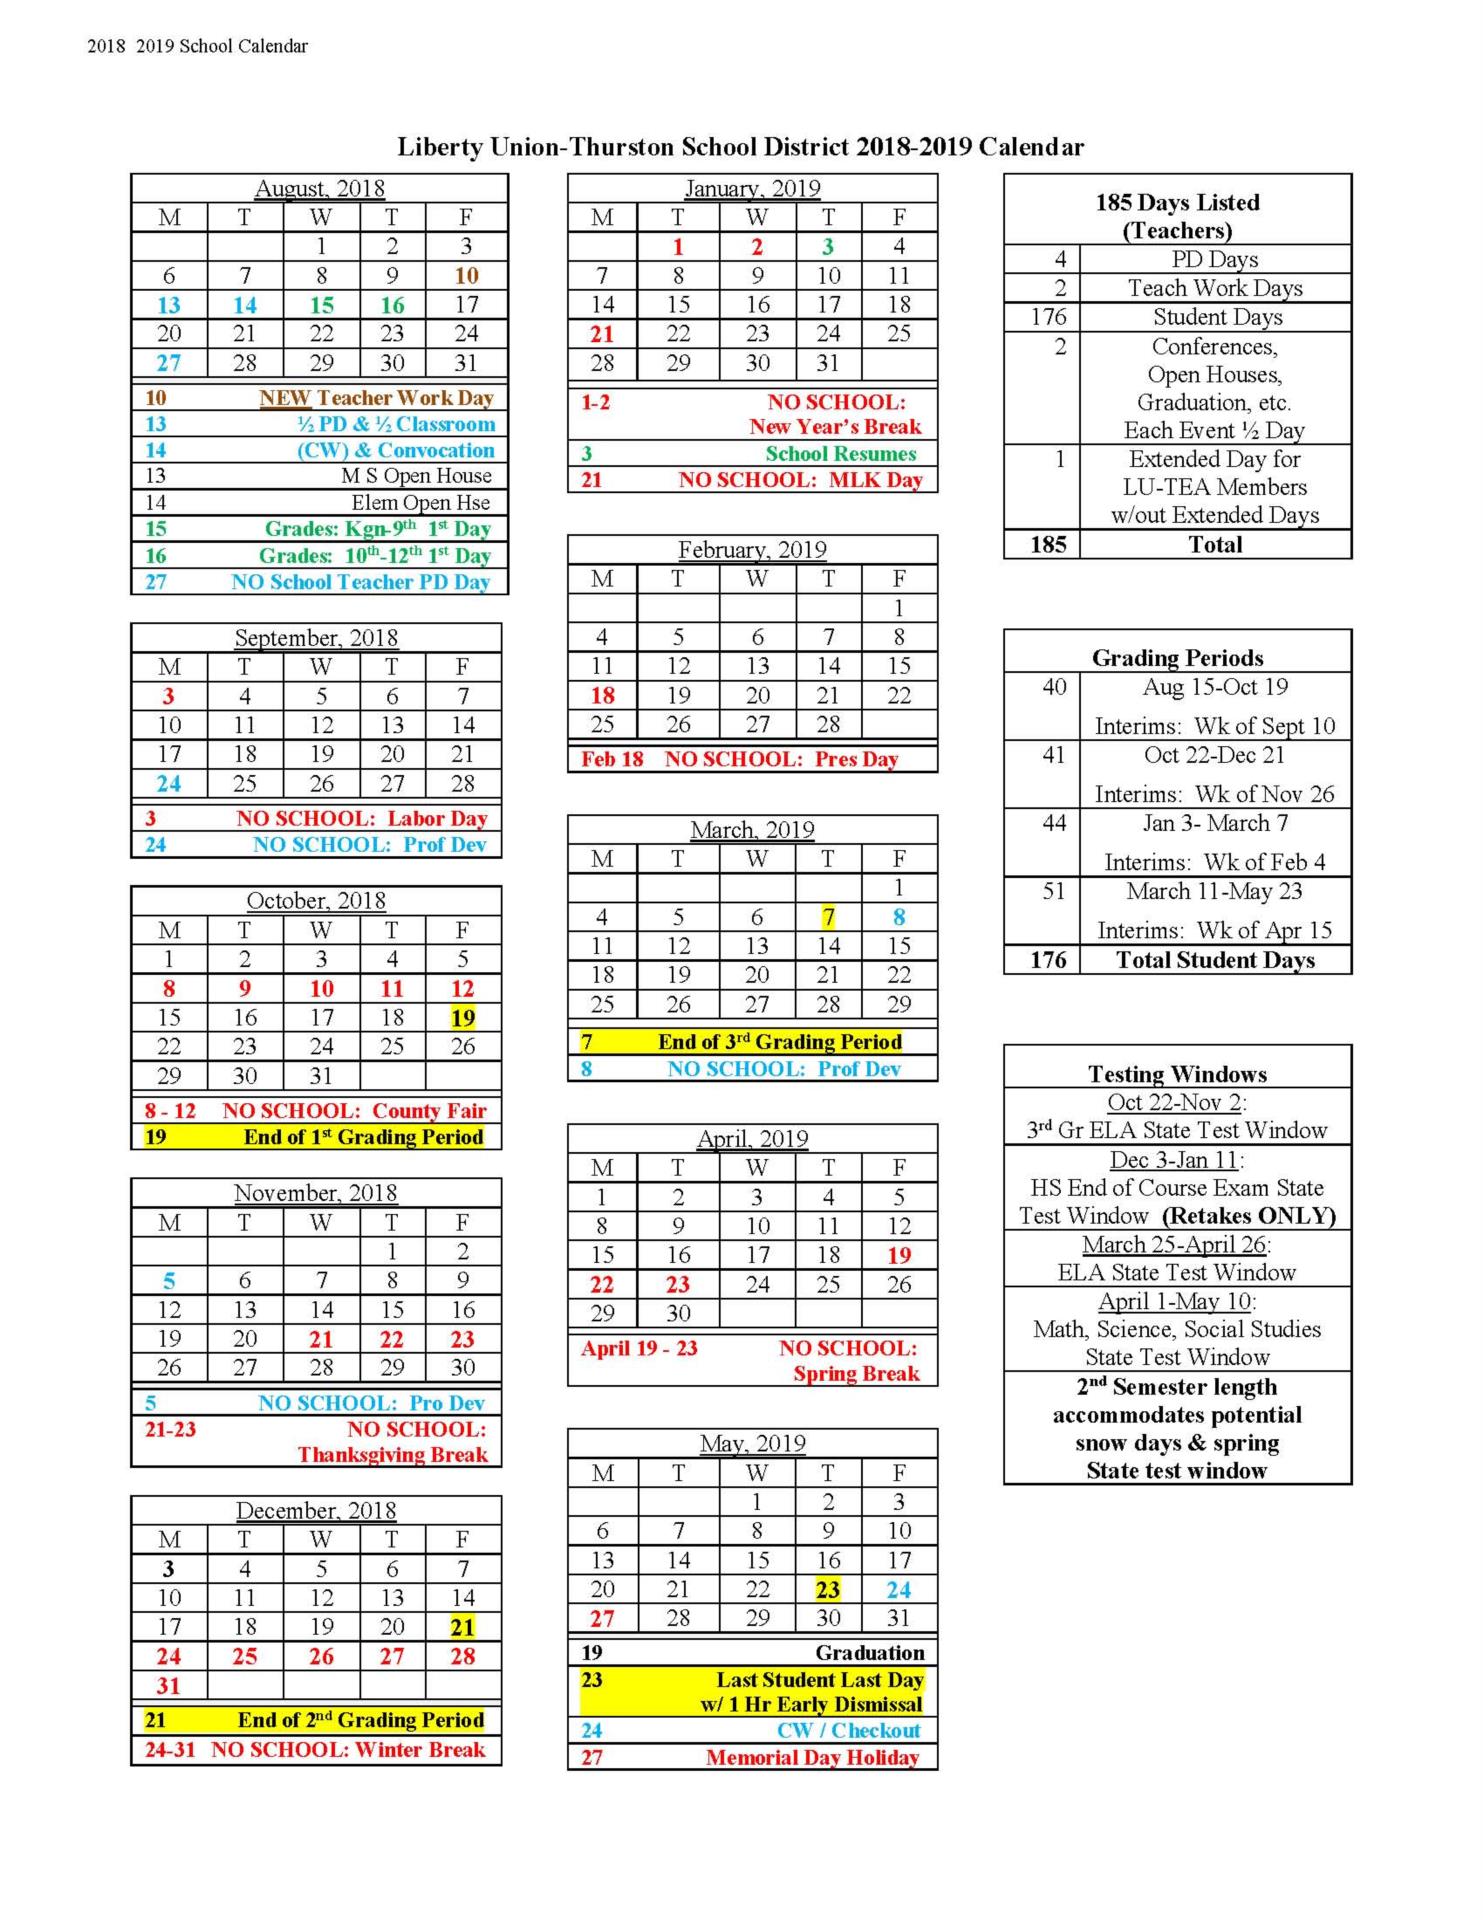 Liberty UnionThurston Local School District Calendar 2018 and 2019